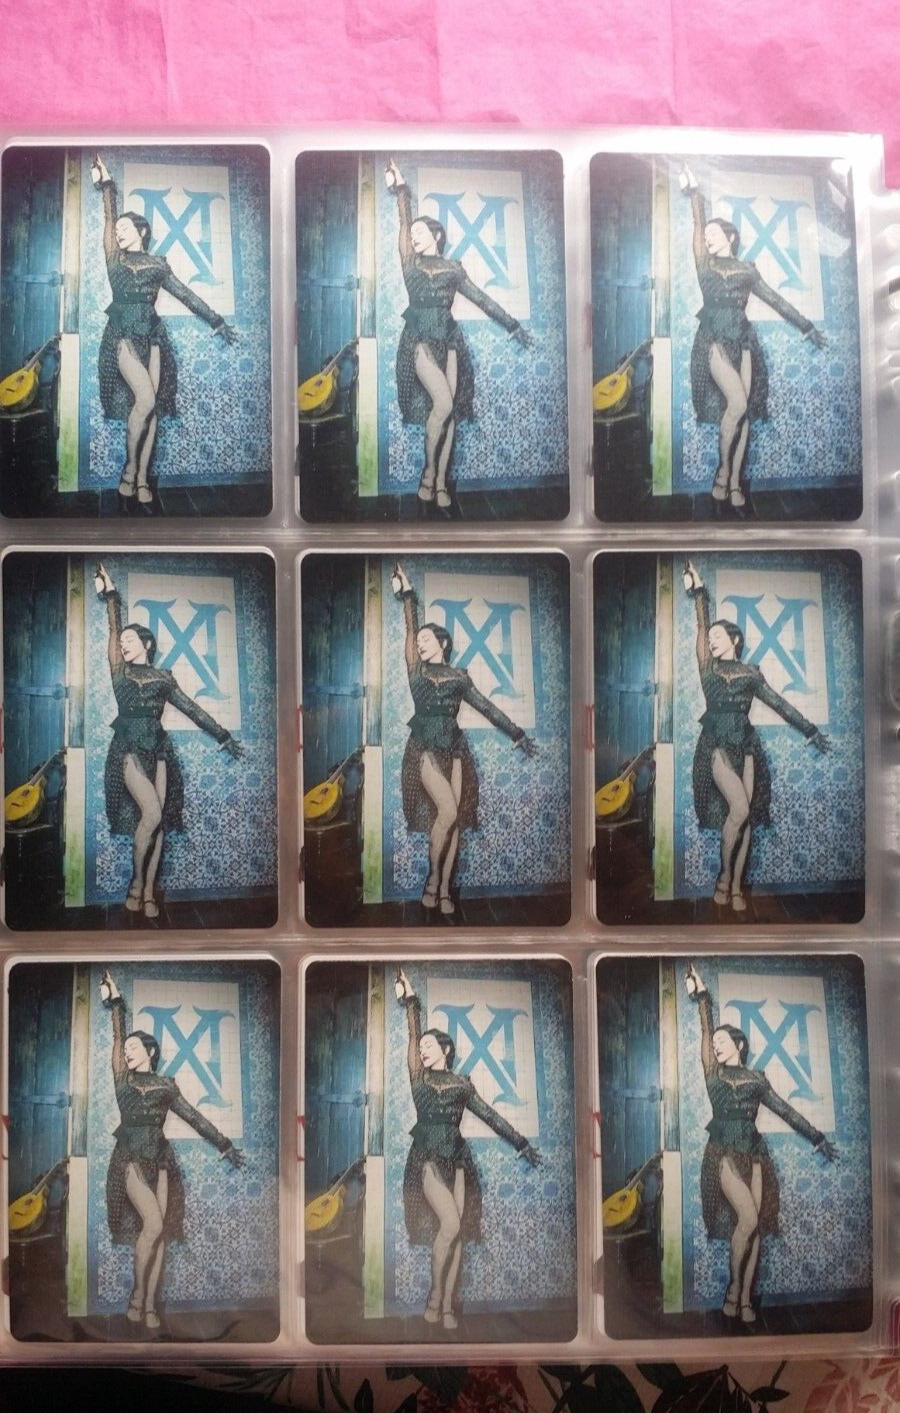 MADONNA Exclusive Playing Cards 1 Off Only Besoke pack (Set 80) See Description.